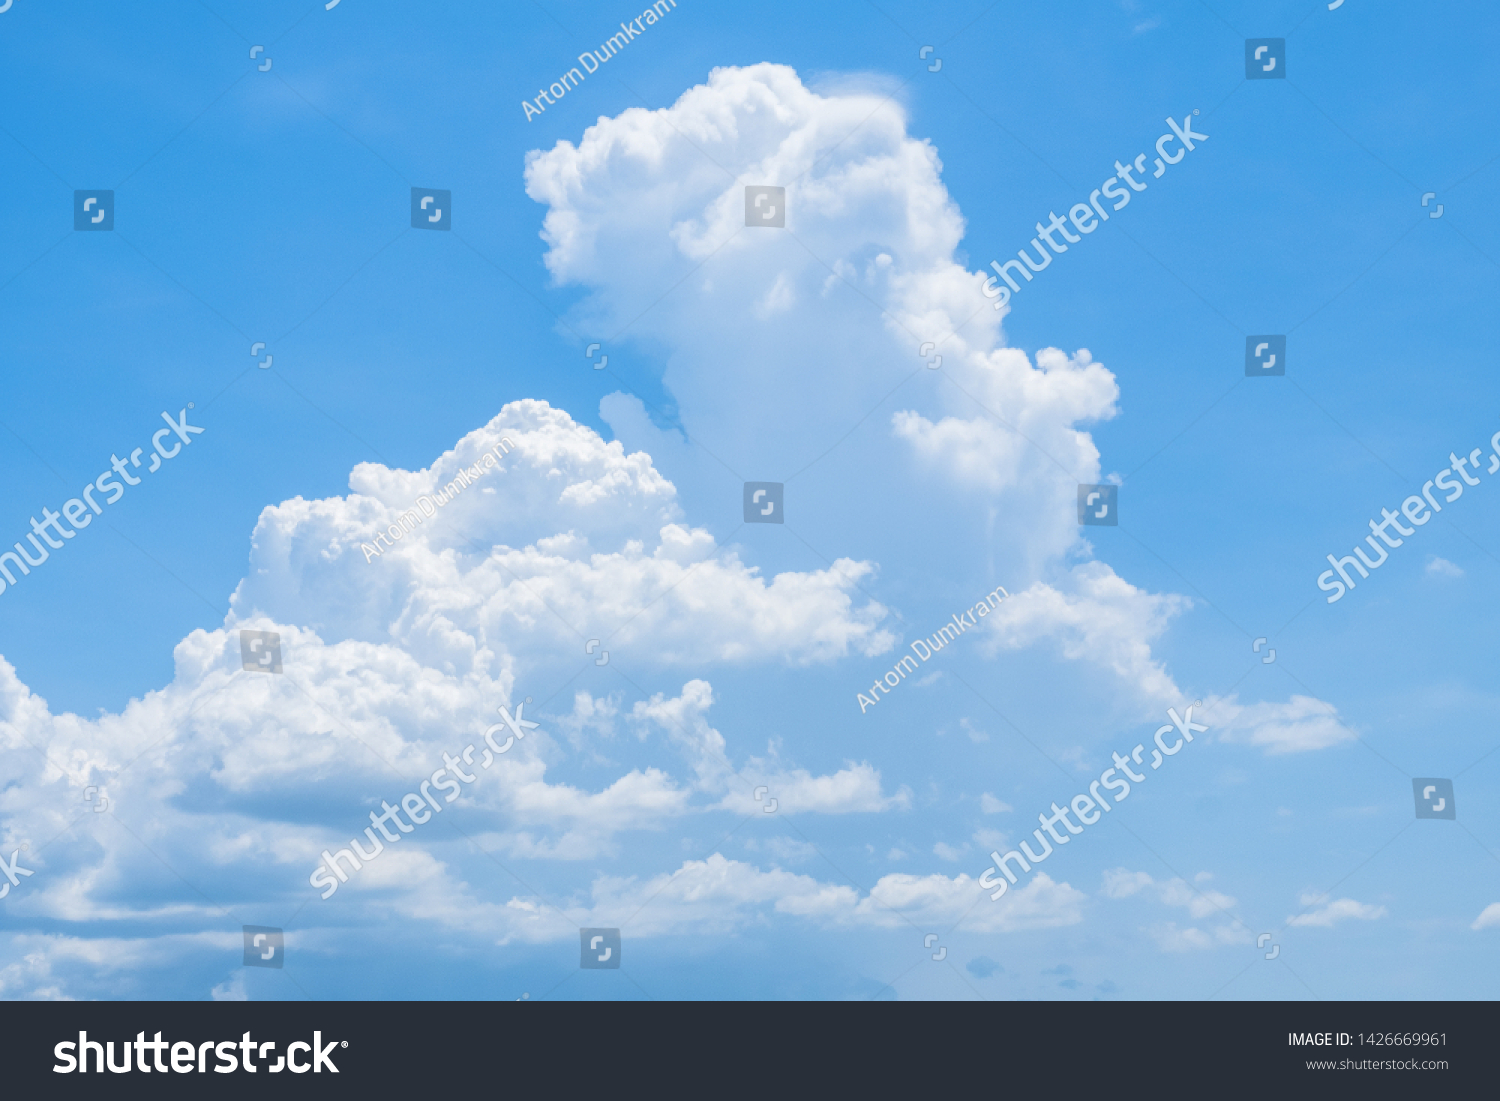 White cloudy with blue sky background. #1426669961